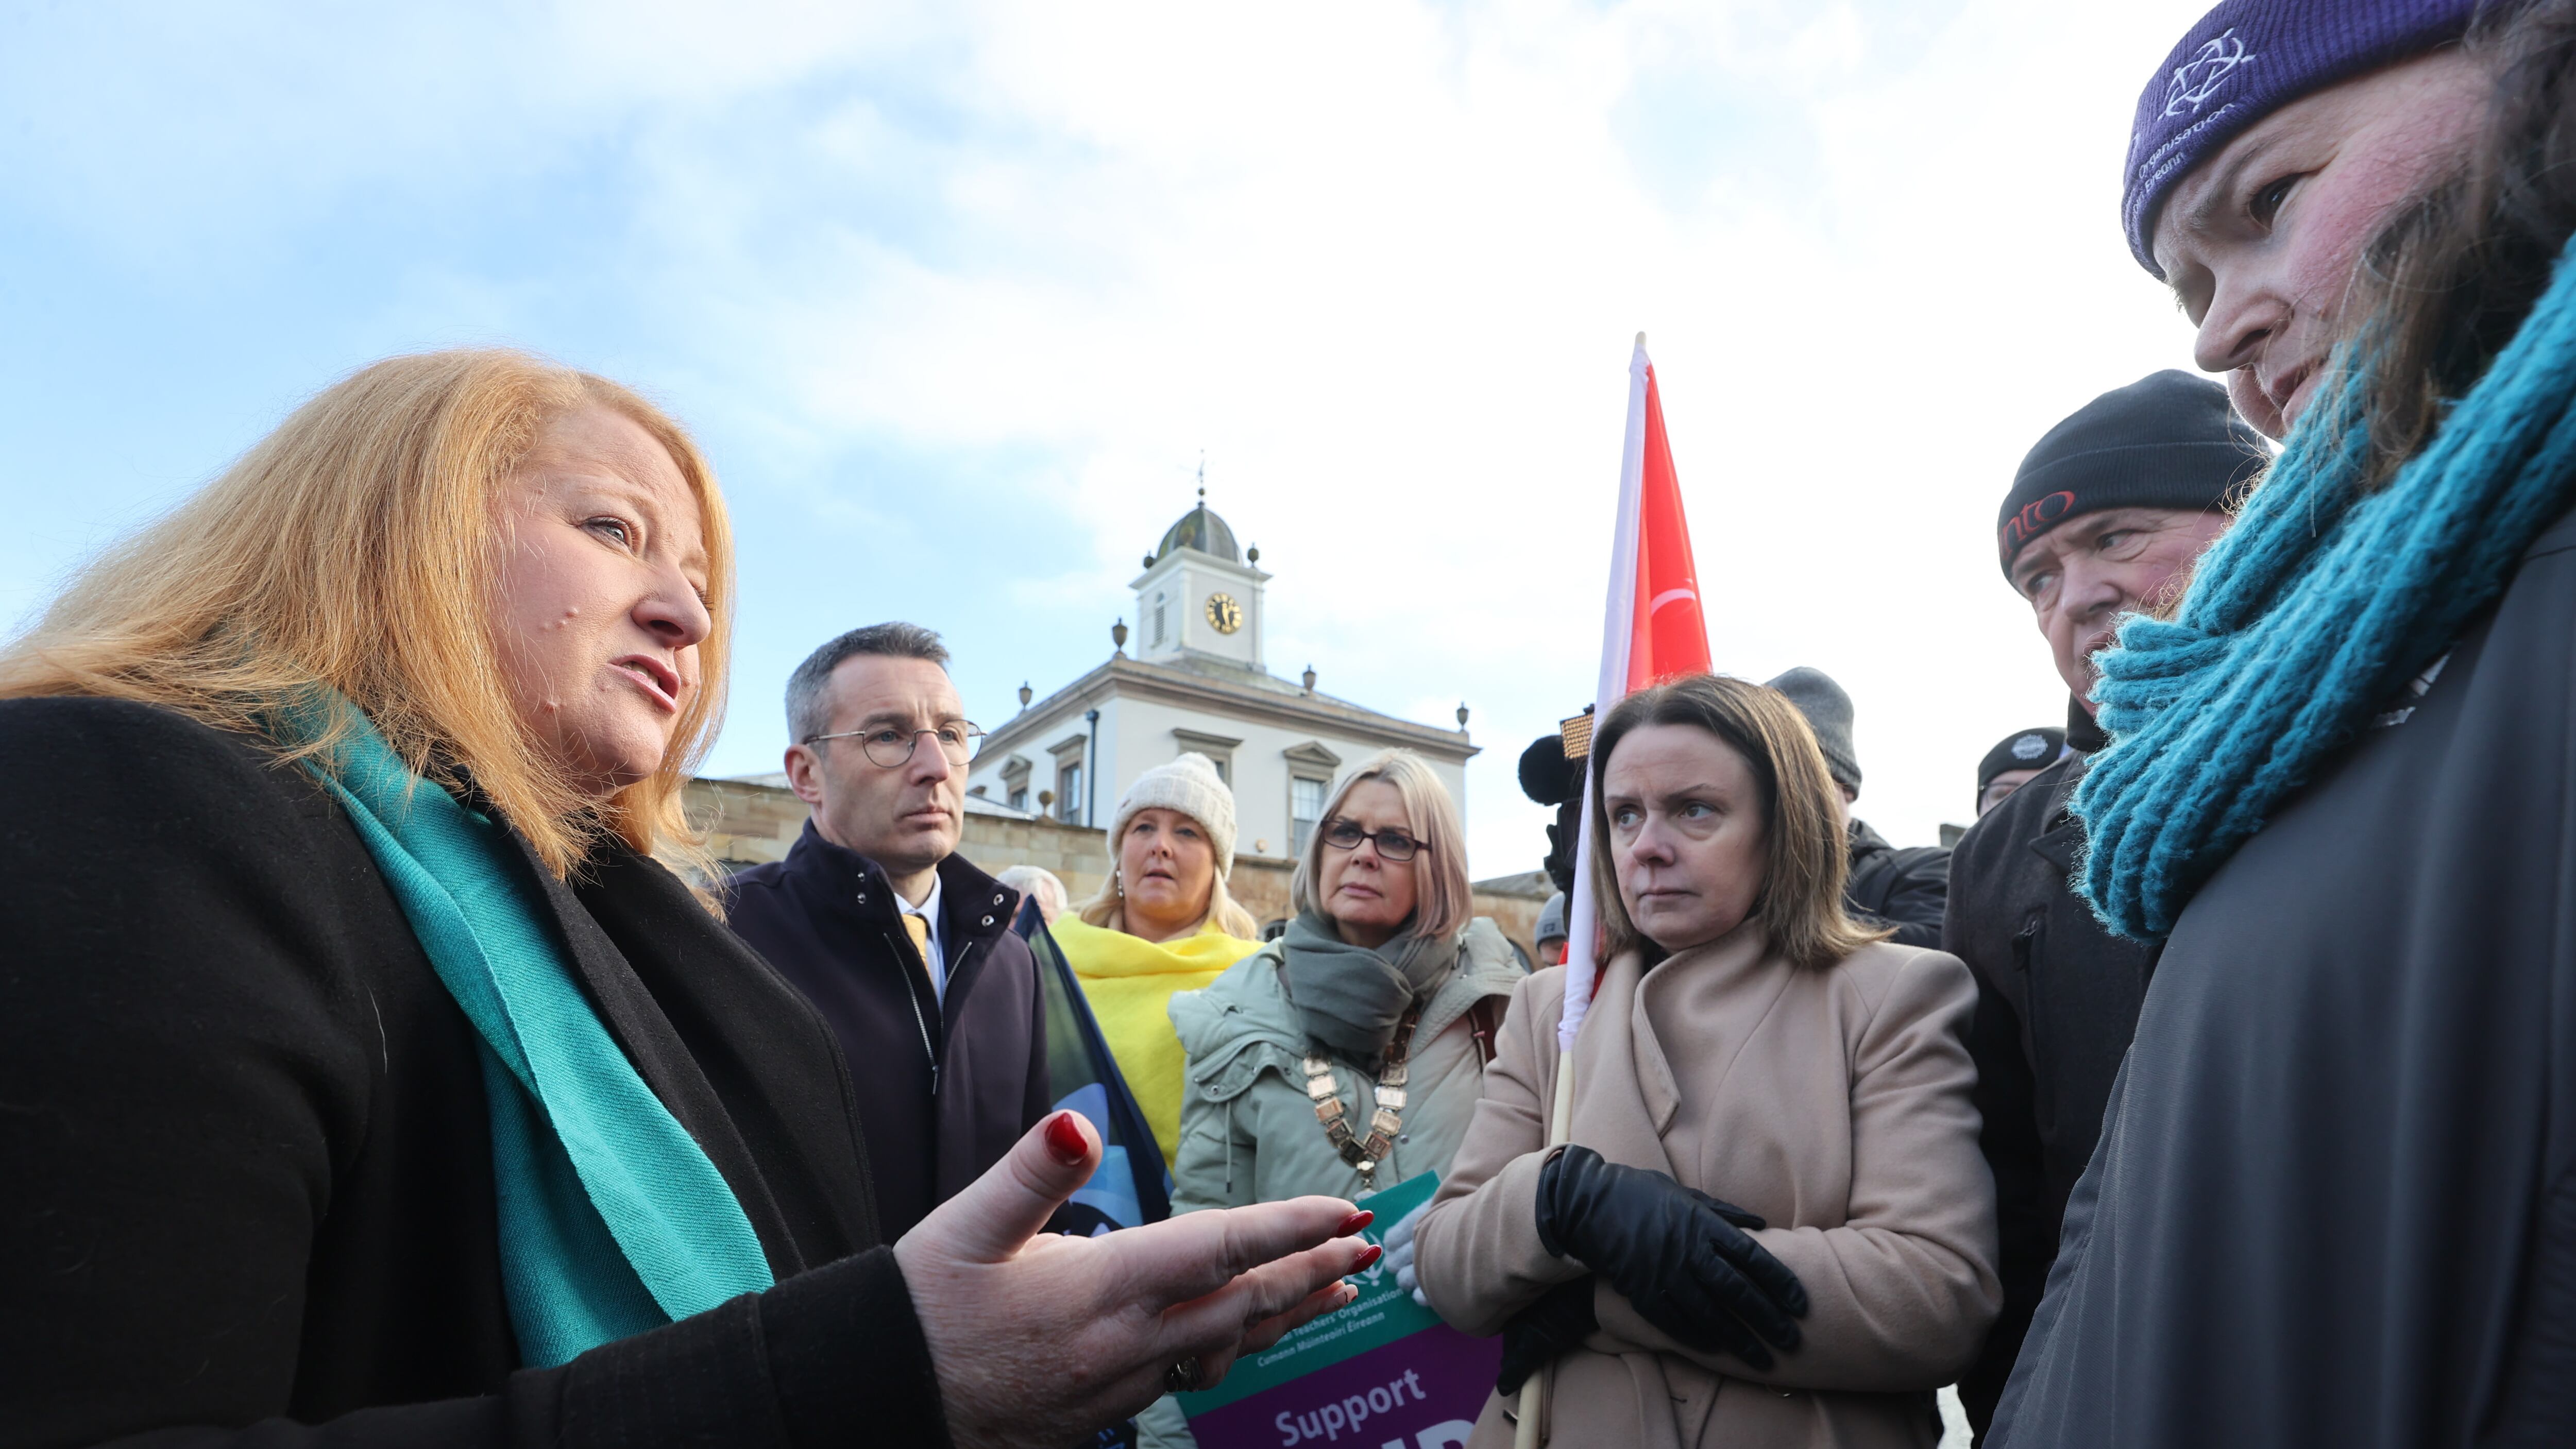 Alliance Party leader Naomi Long (left) with party colleague Andrew Muir (2nd left) speak to representatives from teachers unions as they protest outside Hillsborough Castle, before meeting Northern Ireland Secretary Chris Heaton-Harris as he meets political parties over the Stormont stalemate